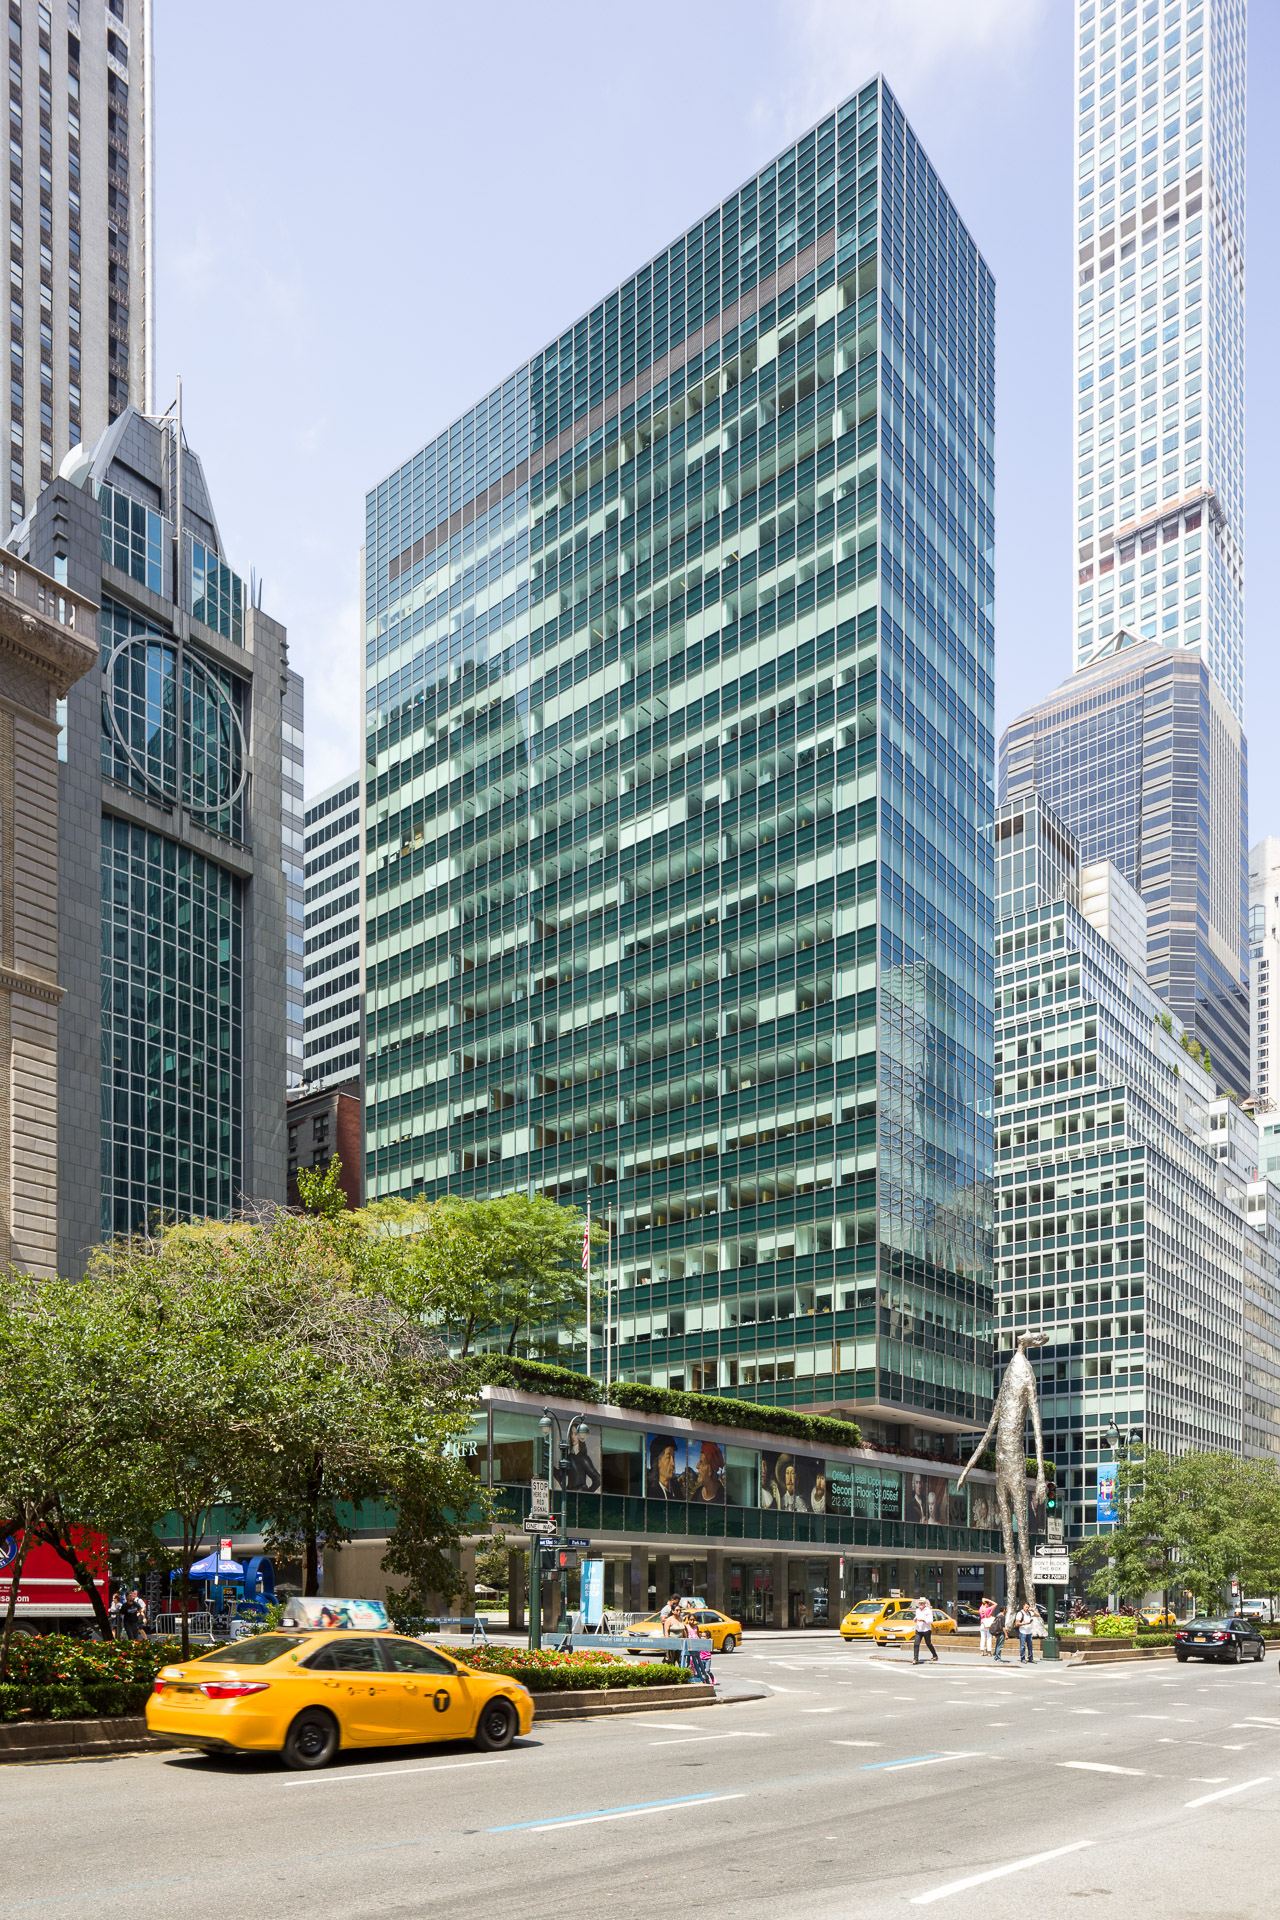 Lever House by Gordon Bunshaft of Skidmore, Owings & Merrill in New York, NY. Photo by Jason R. Woods.